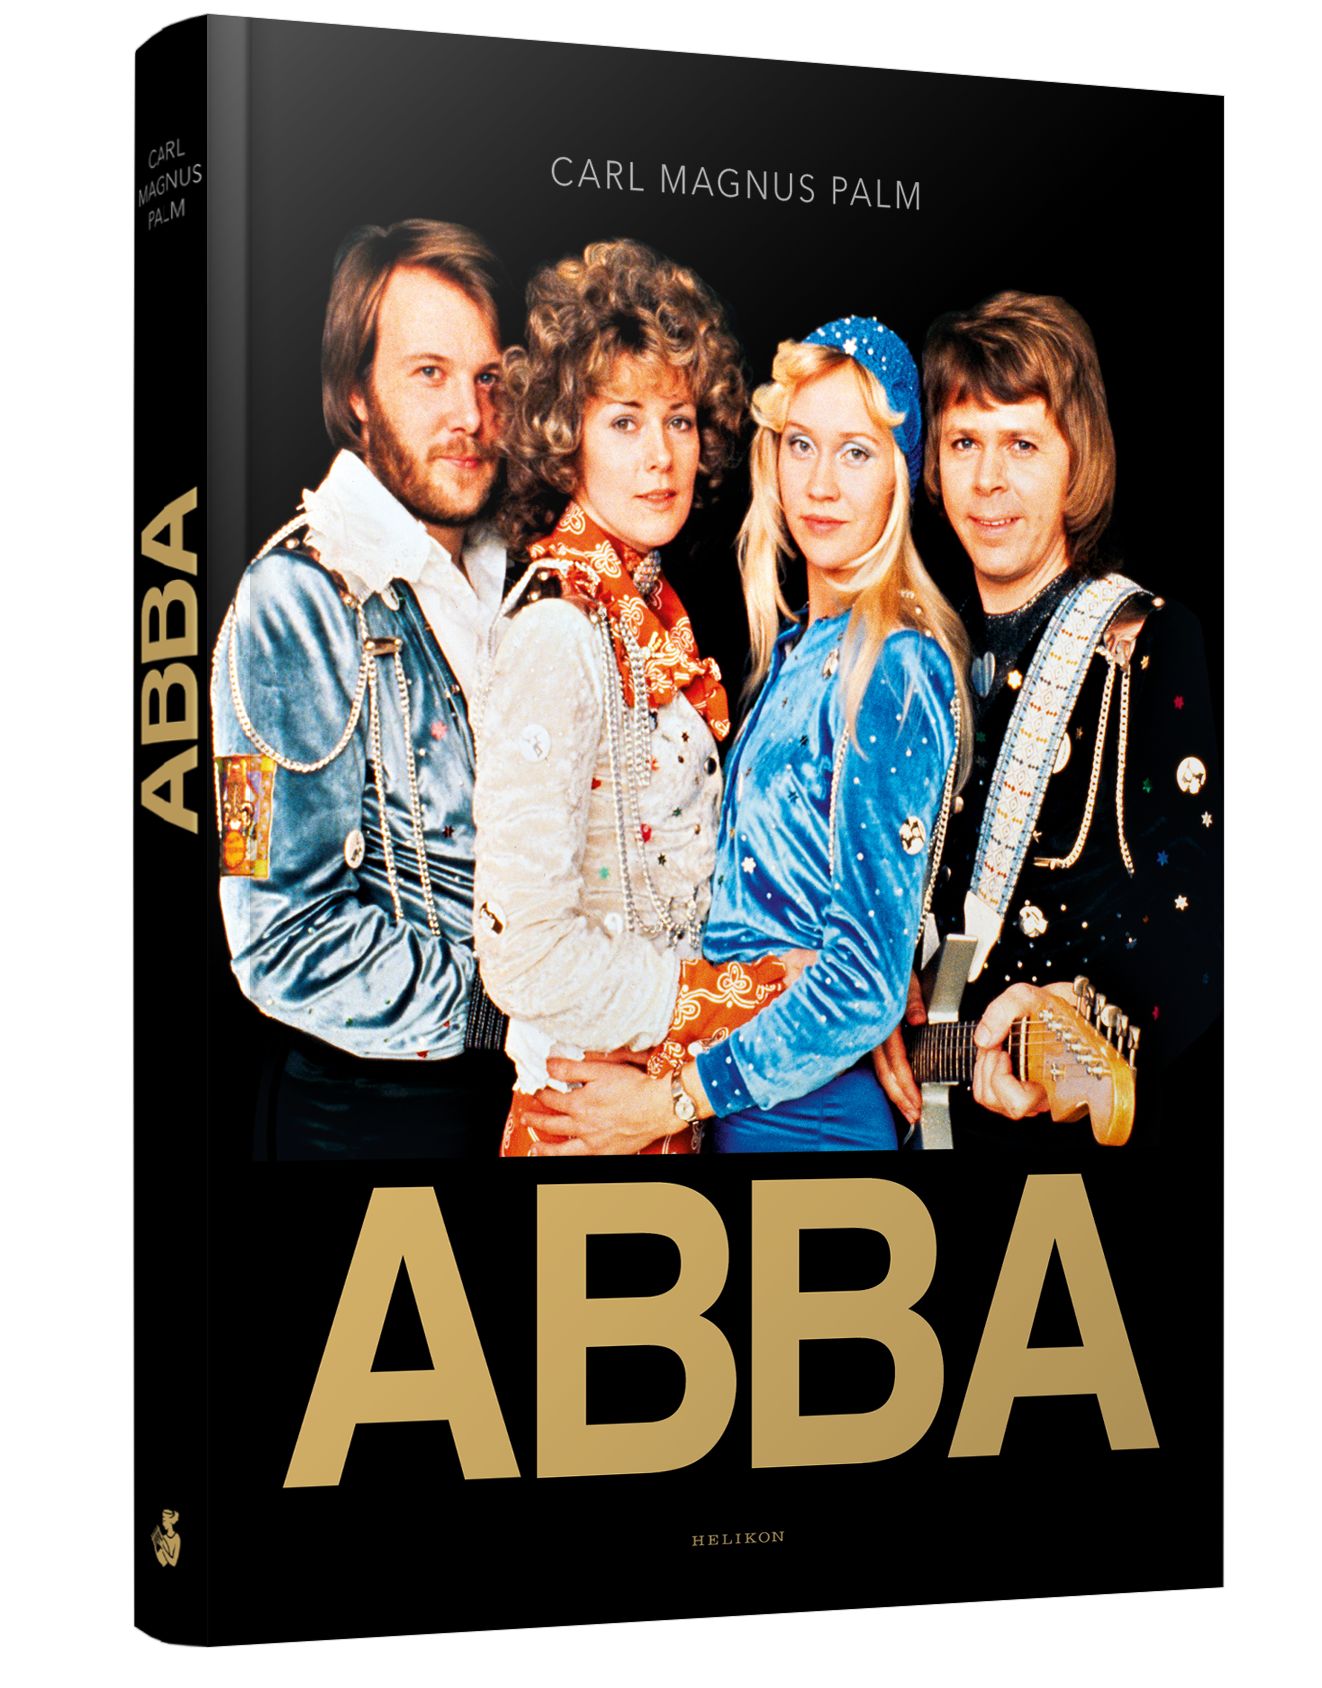 ABBA at 50 in Hungarian – an interview with Carl Magnus Palm